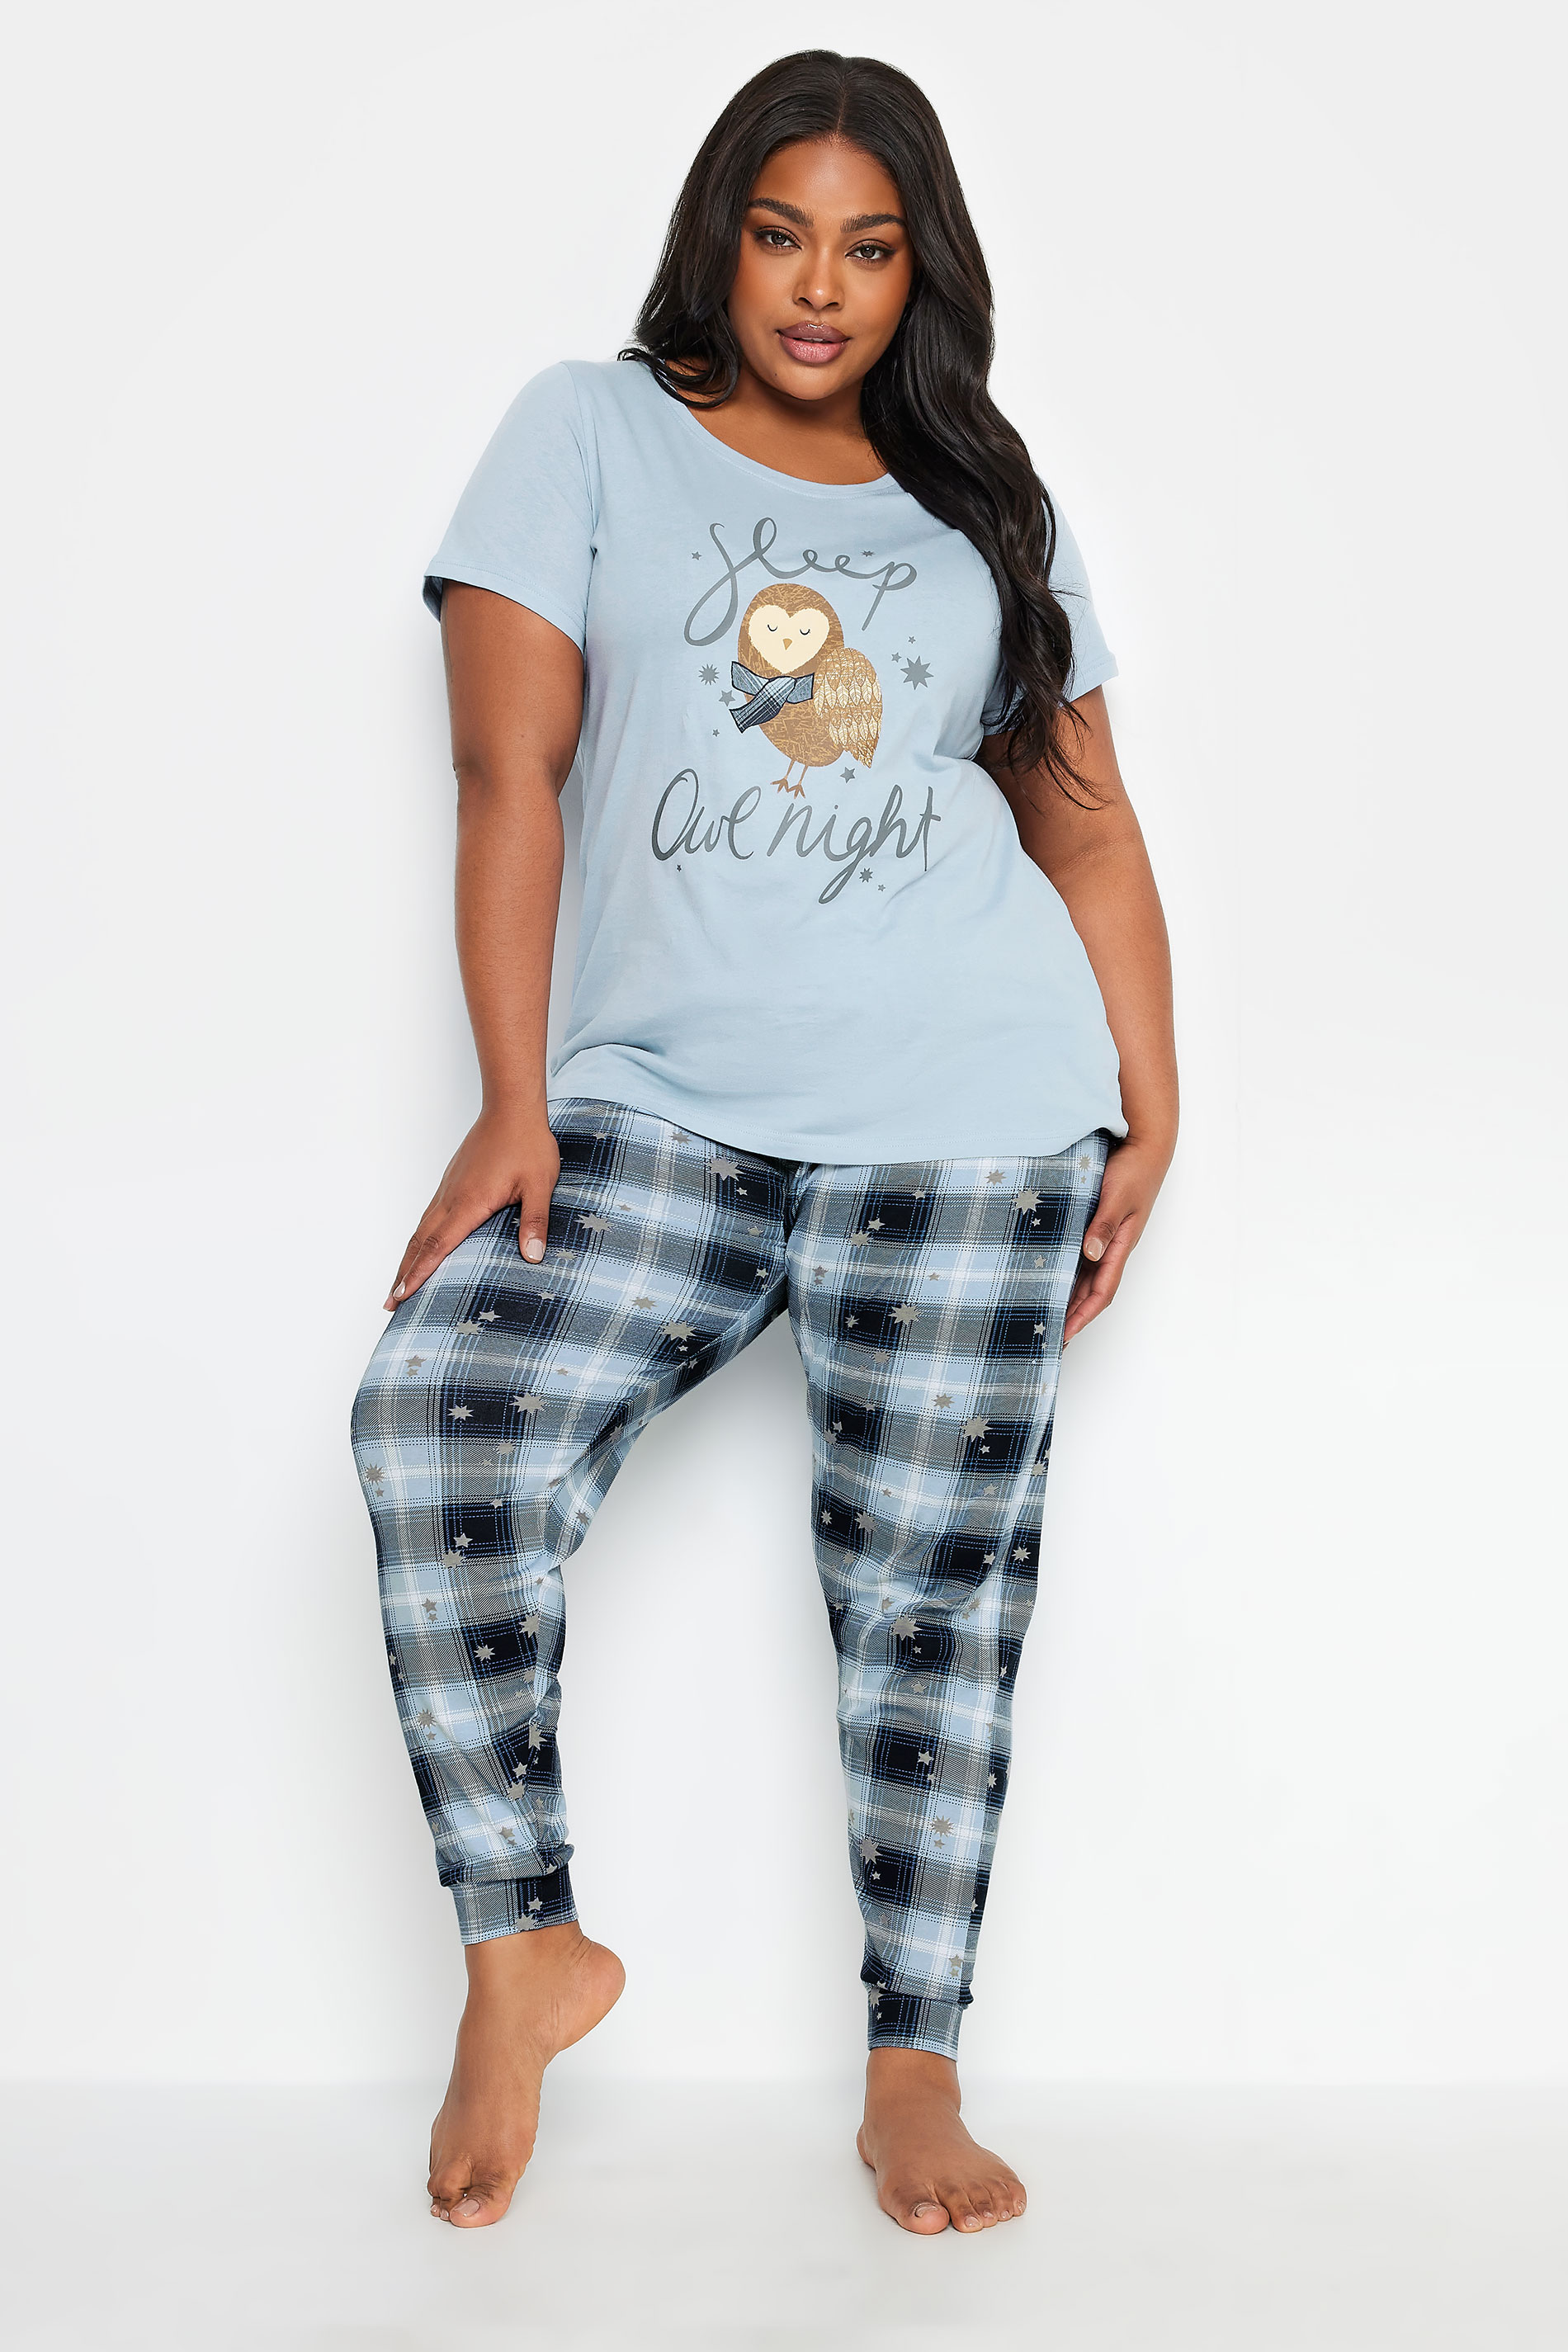 online-store sleep ware, Pj Store Pyjamas and more,,, by cudographic